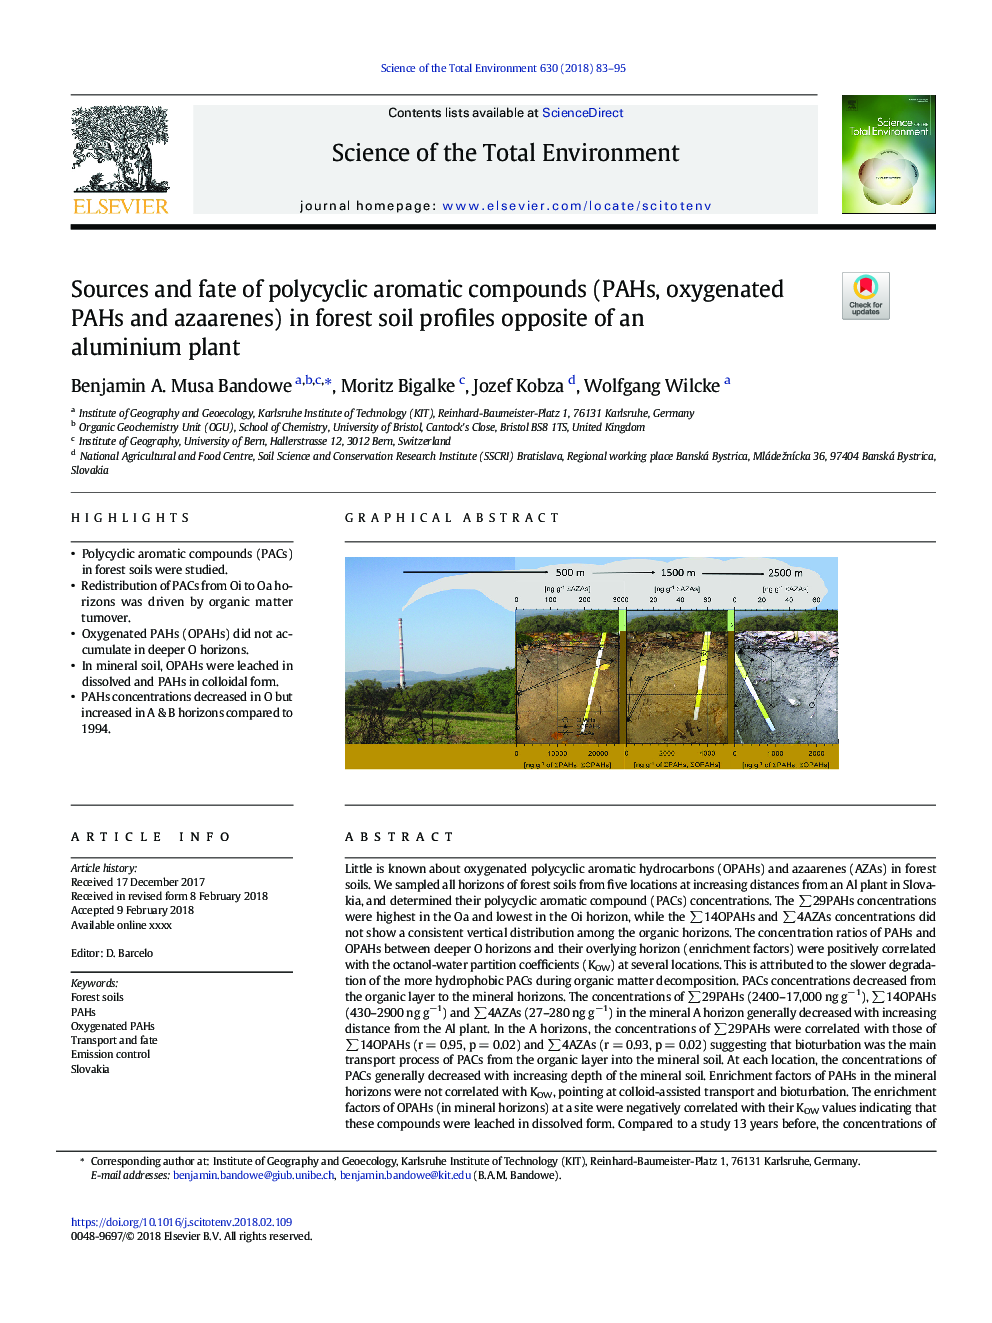 Sources and fate of polycyclic aromatic compounds (PAHs, oxygenated PAHs and azaarenes) in forest soil profiles opposite of an aluminium plant